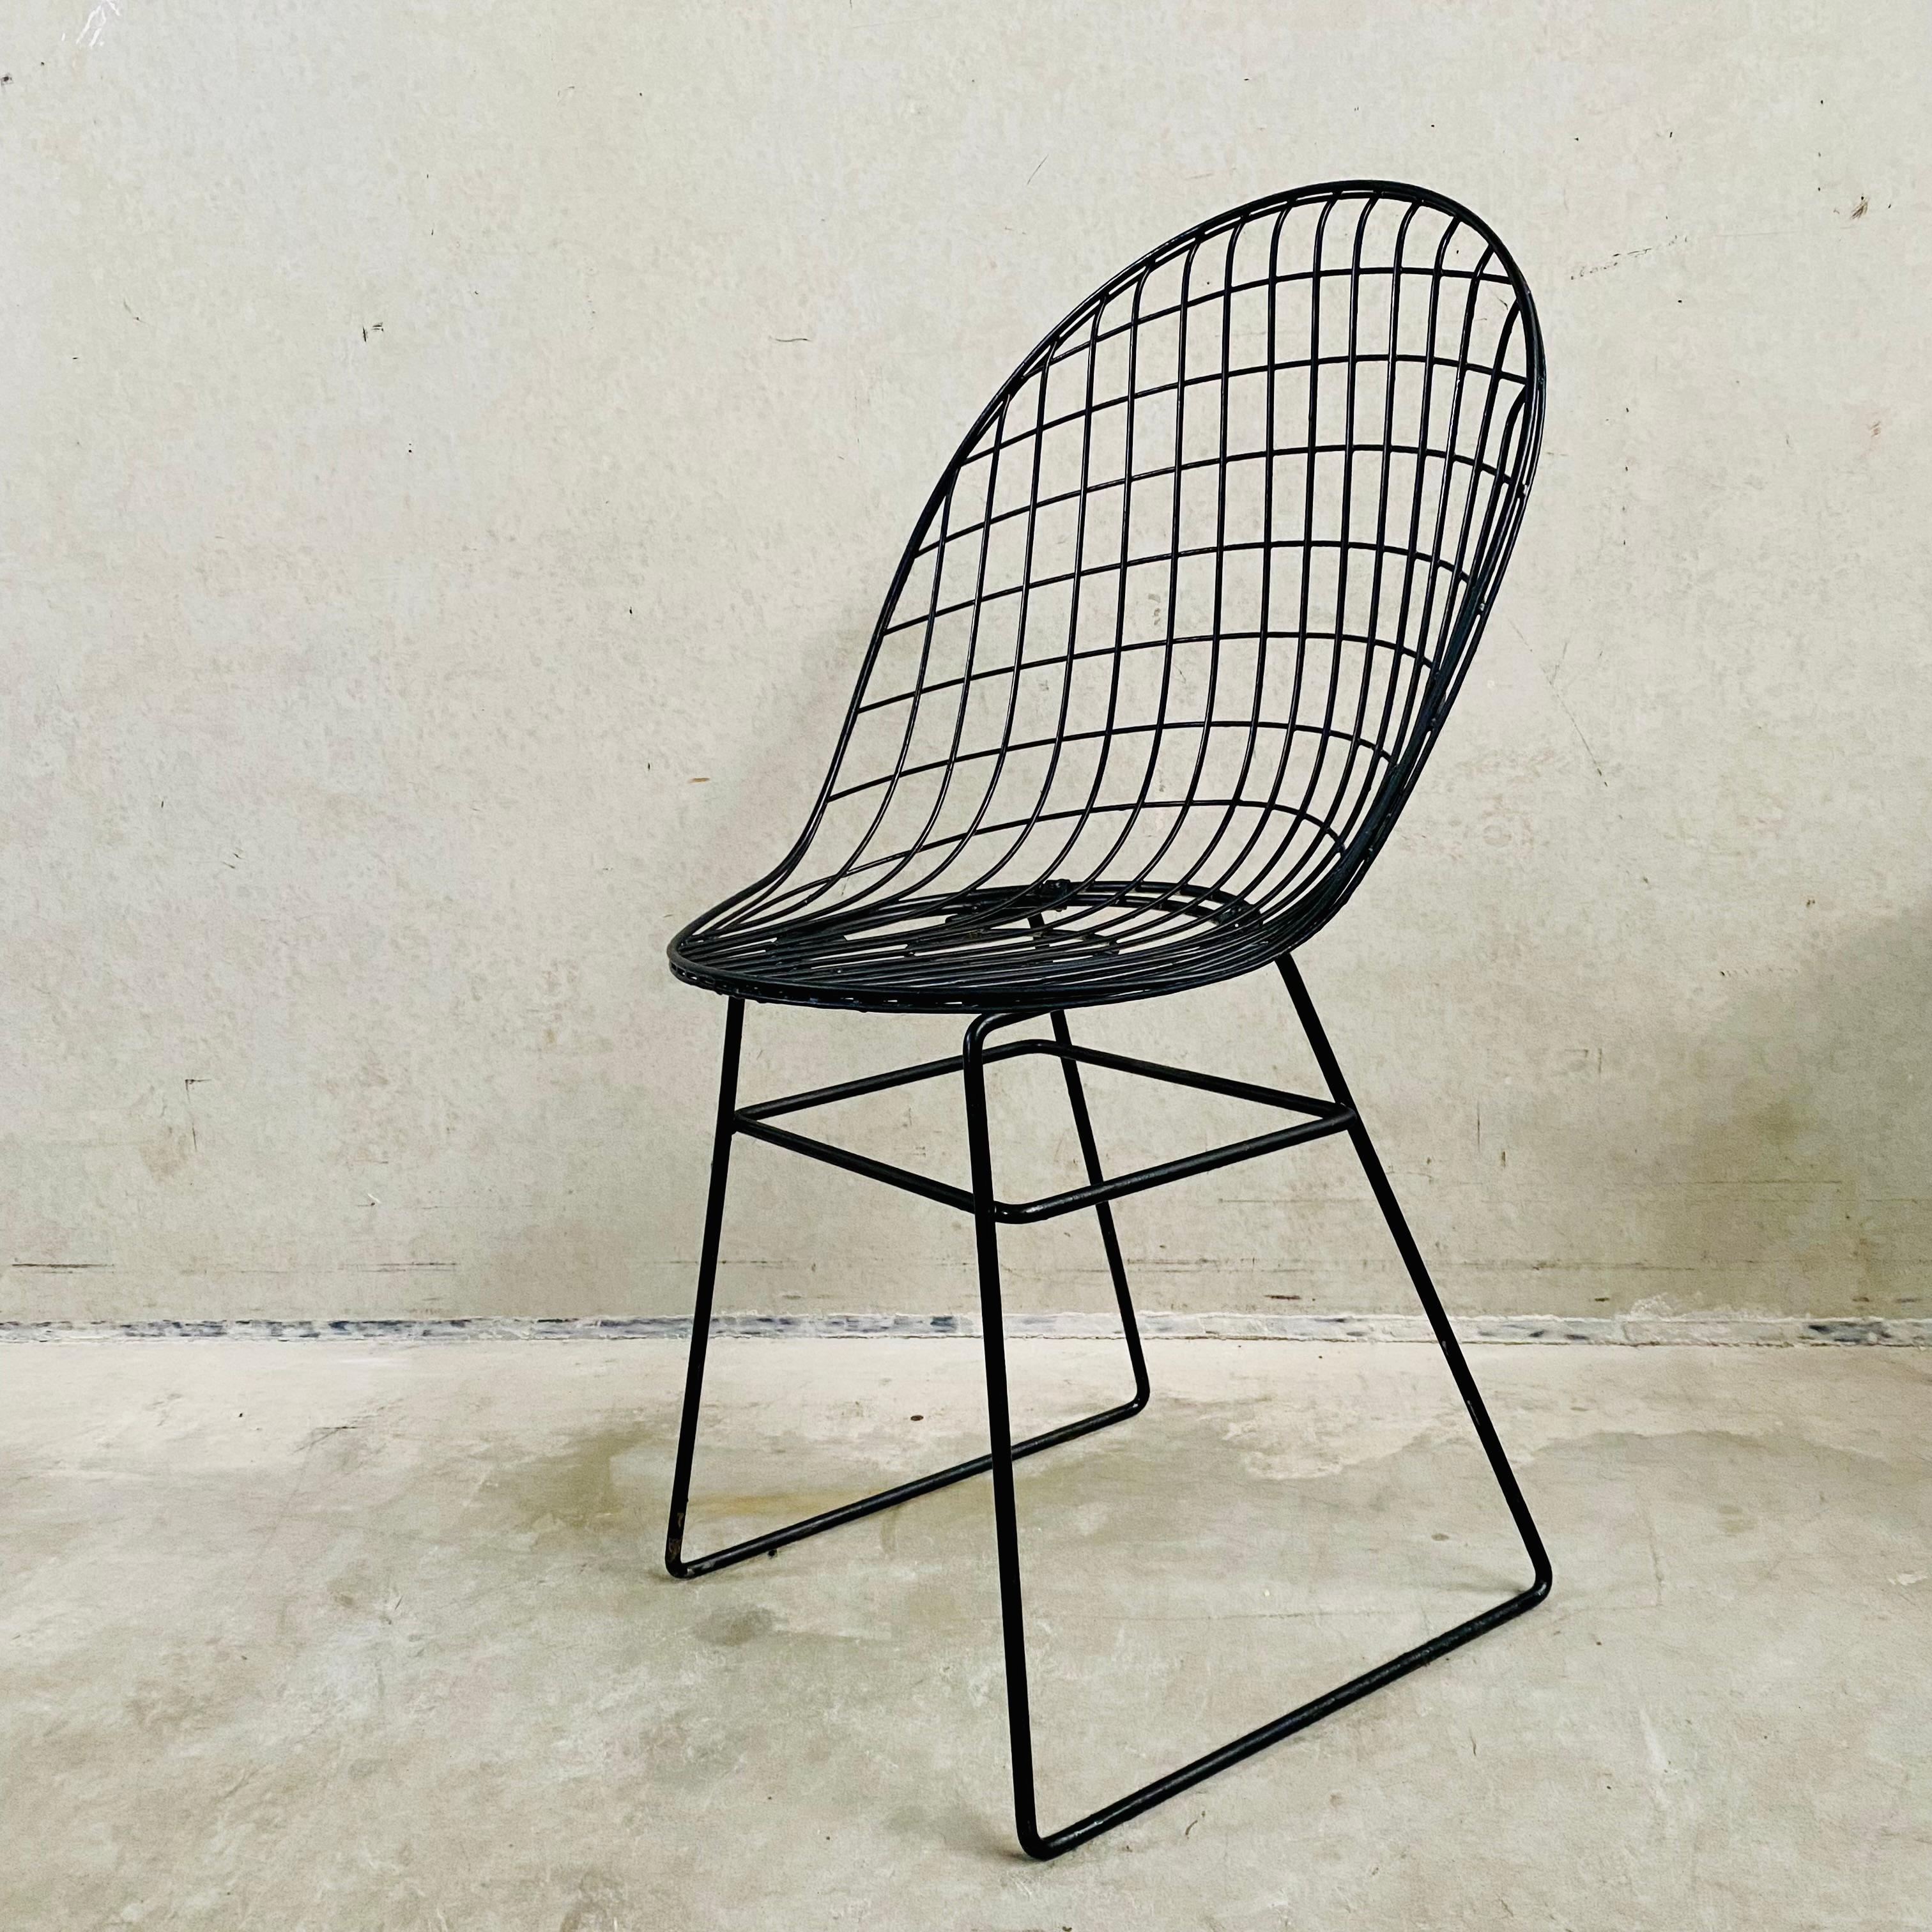 4 Early Edition Wire Chairs by Cees Braakman & A. Dekker for UMS Pastoe, 1950 For Sale 6